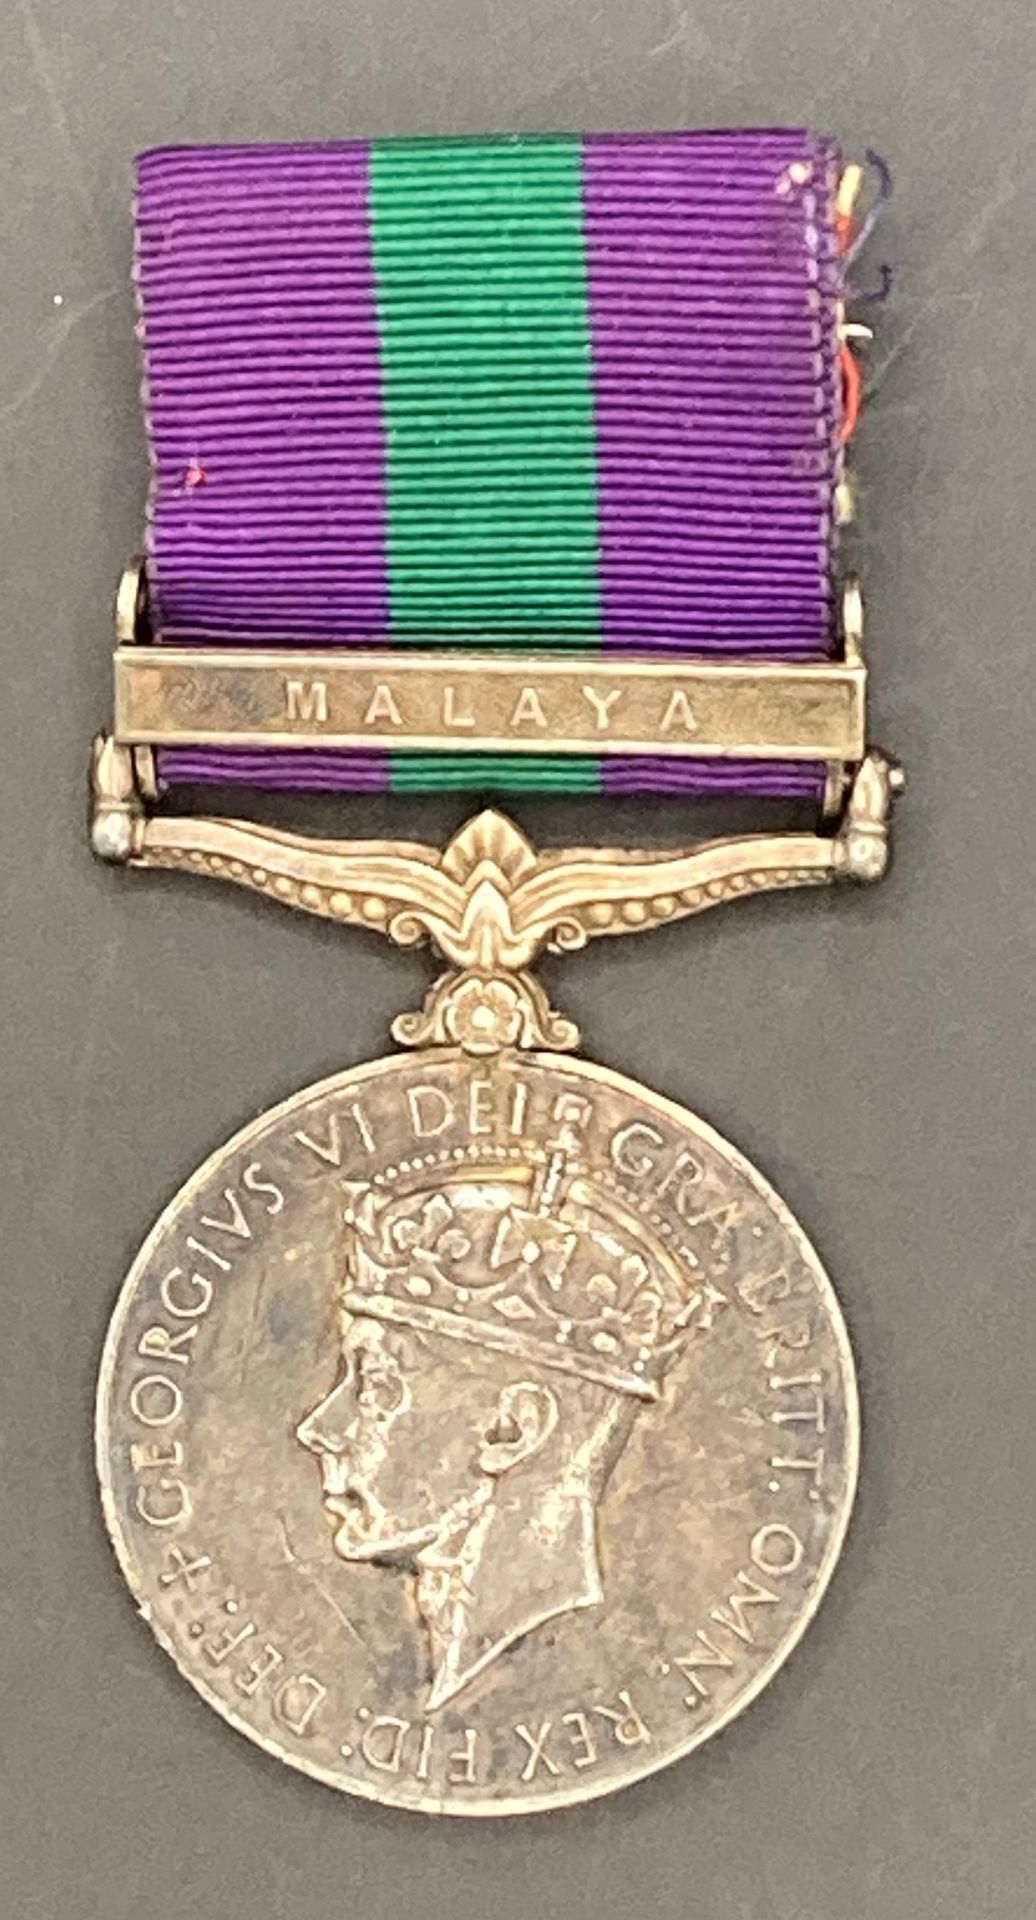 General Service Medal with Malaya clasp and ribbon in box of issue to 21007067 Gdsm R Simpson Coldm - Image 2 of 3